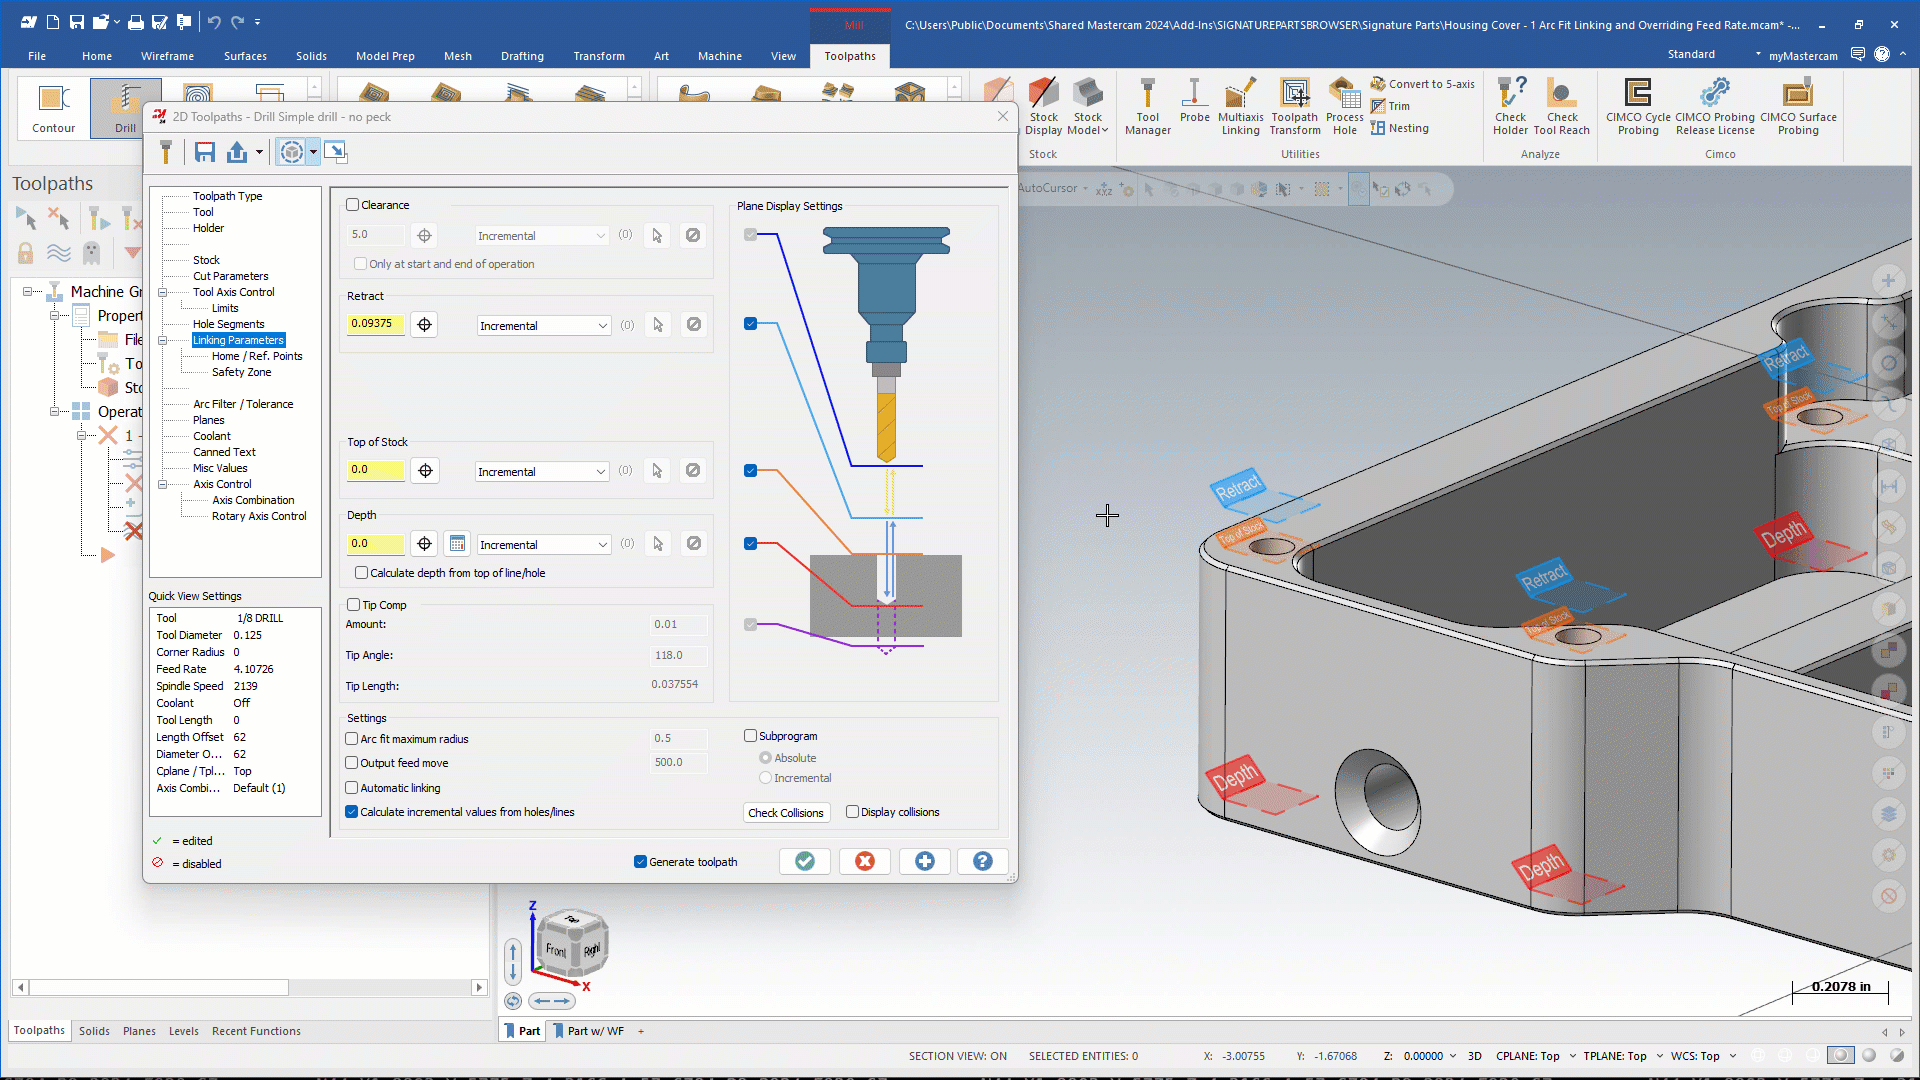 Setting retract height markers for holemaking toolpaths in Mastercam 2024.